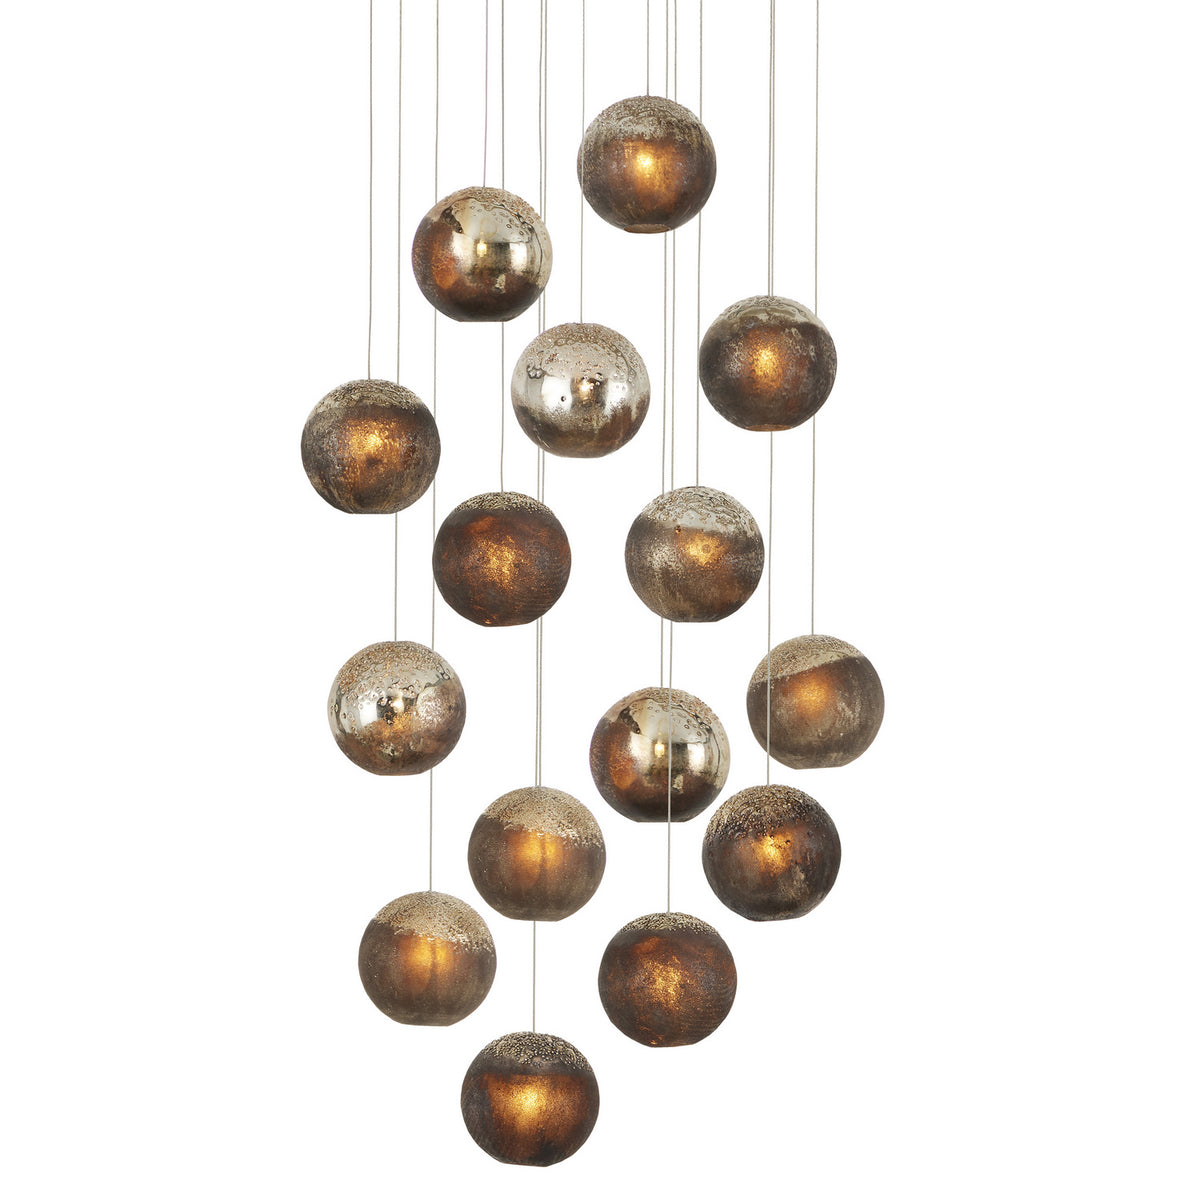 Currey and Company - 9000-1015 - 15 Light Pendant - Pathos - Antique Silver/Antique Gold/Matte Charcoal/Silver